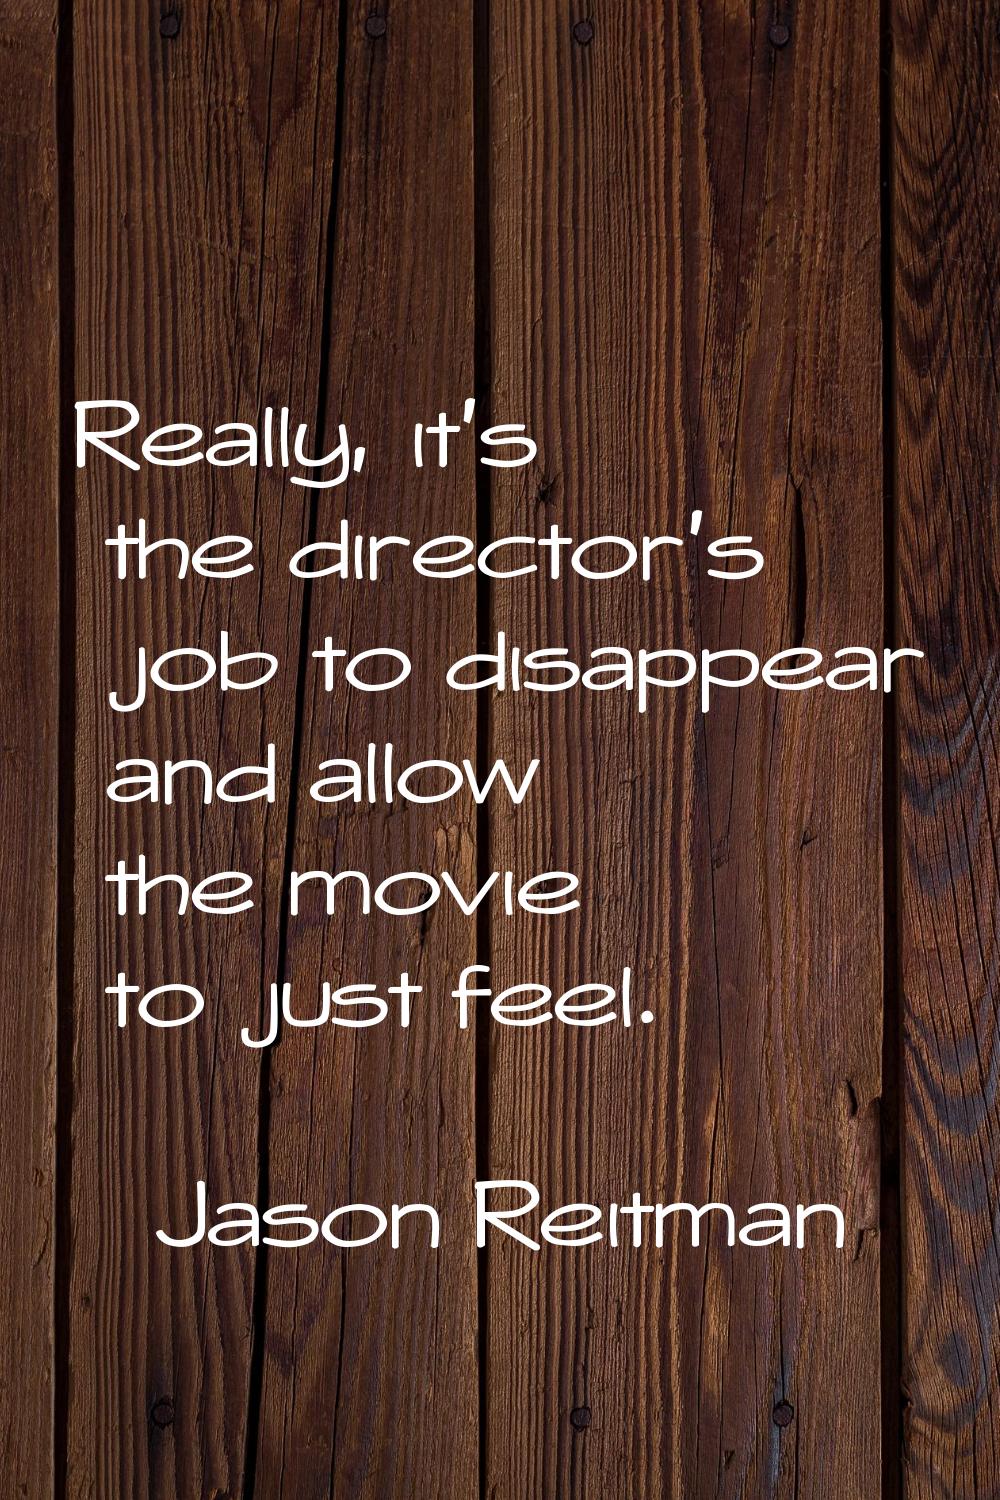 Really, it's the director's job to disappear and allow the movie to just feel.